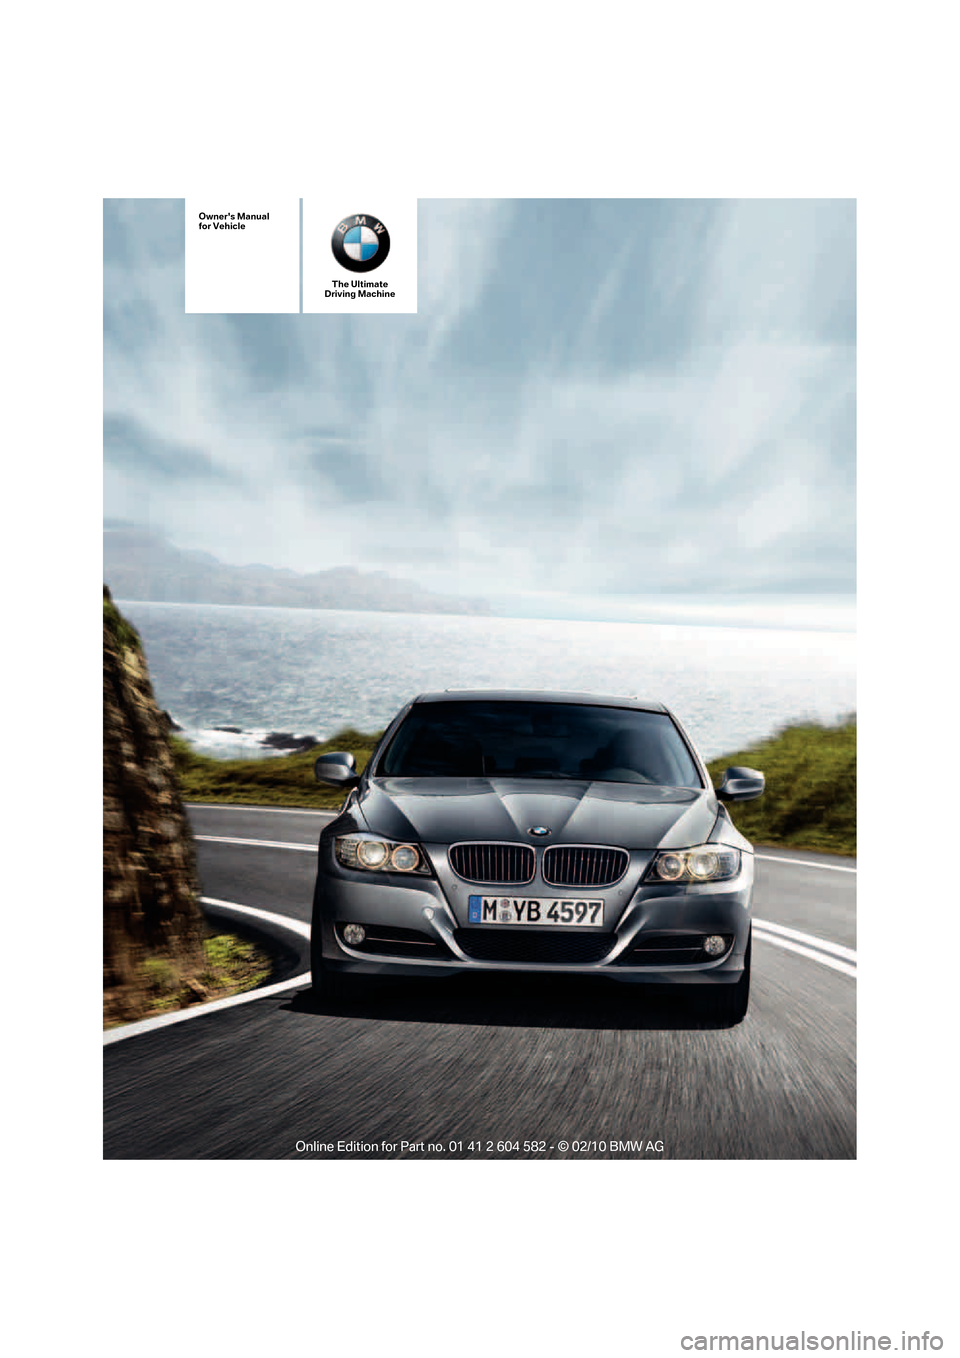 BMW 328I 2011 E90 Owners Manual The Ultimate
Driving Machine
Owners Manual
for Vehicle 